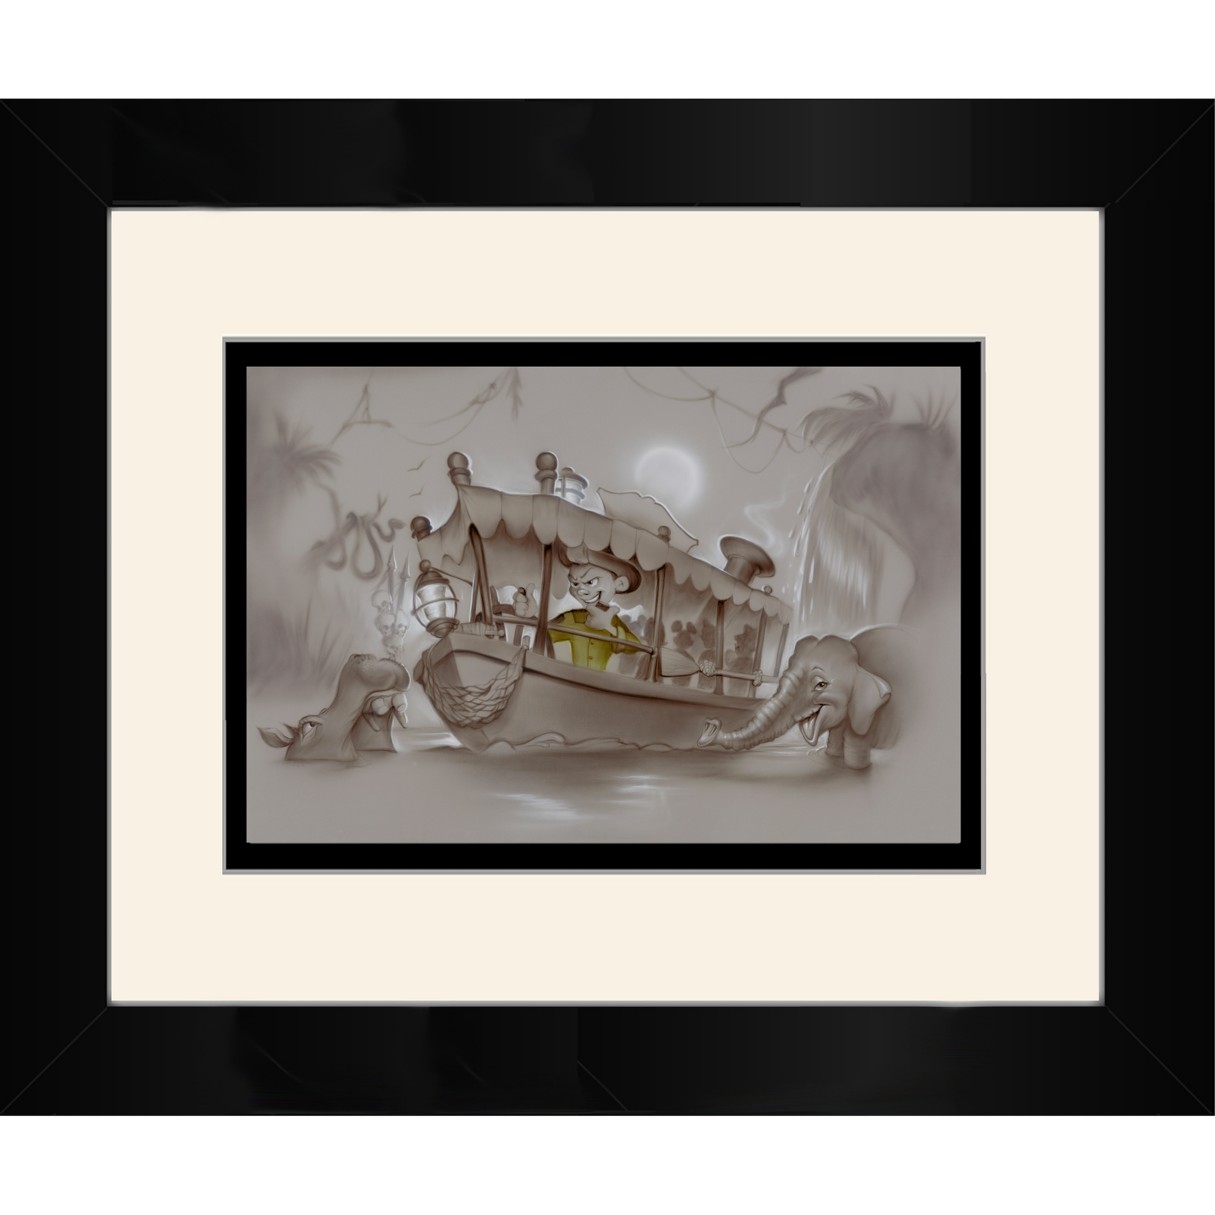 ''The 8th Wonder of the World'' Framed Deluxe Print by Noah